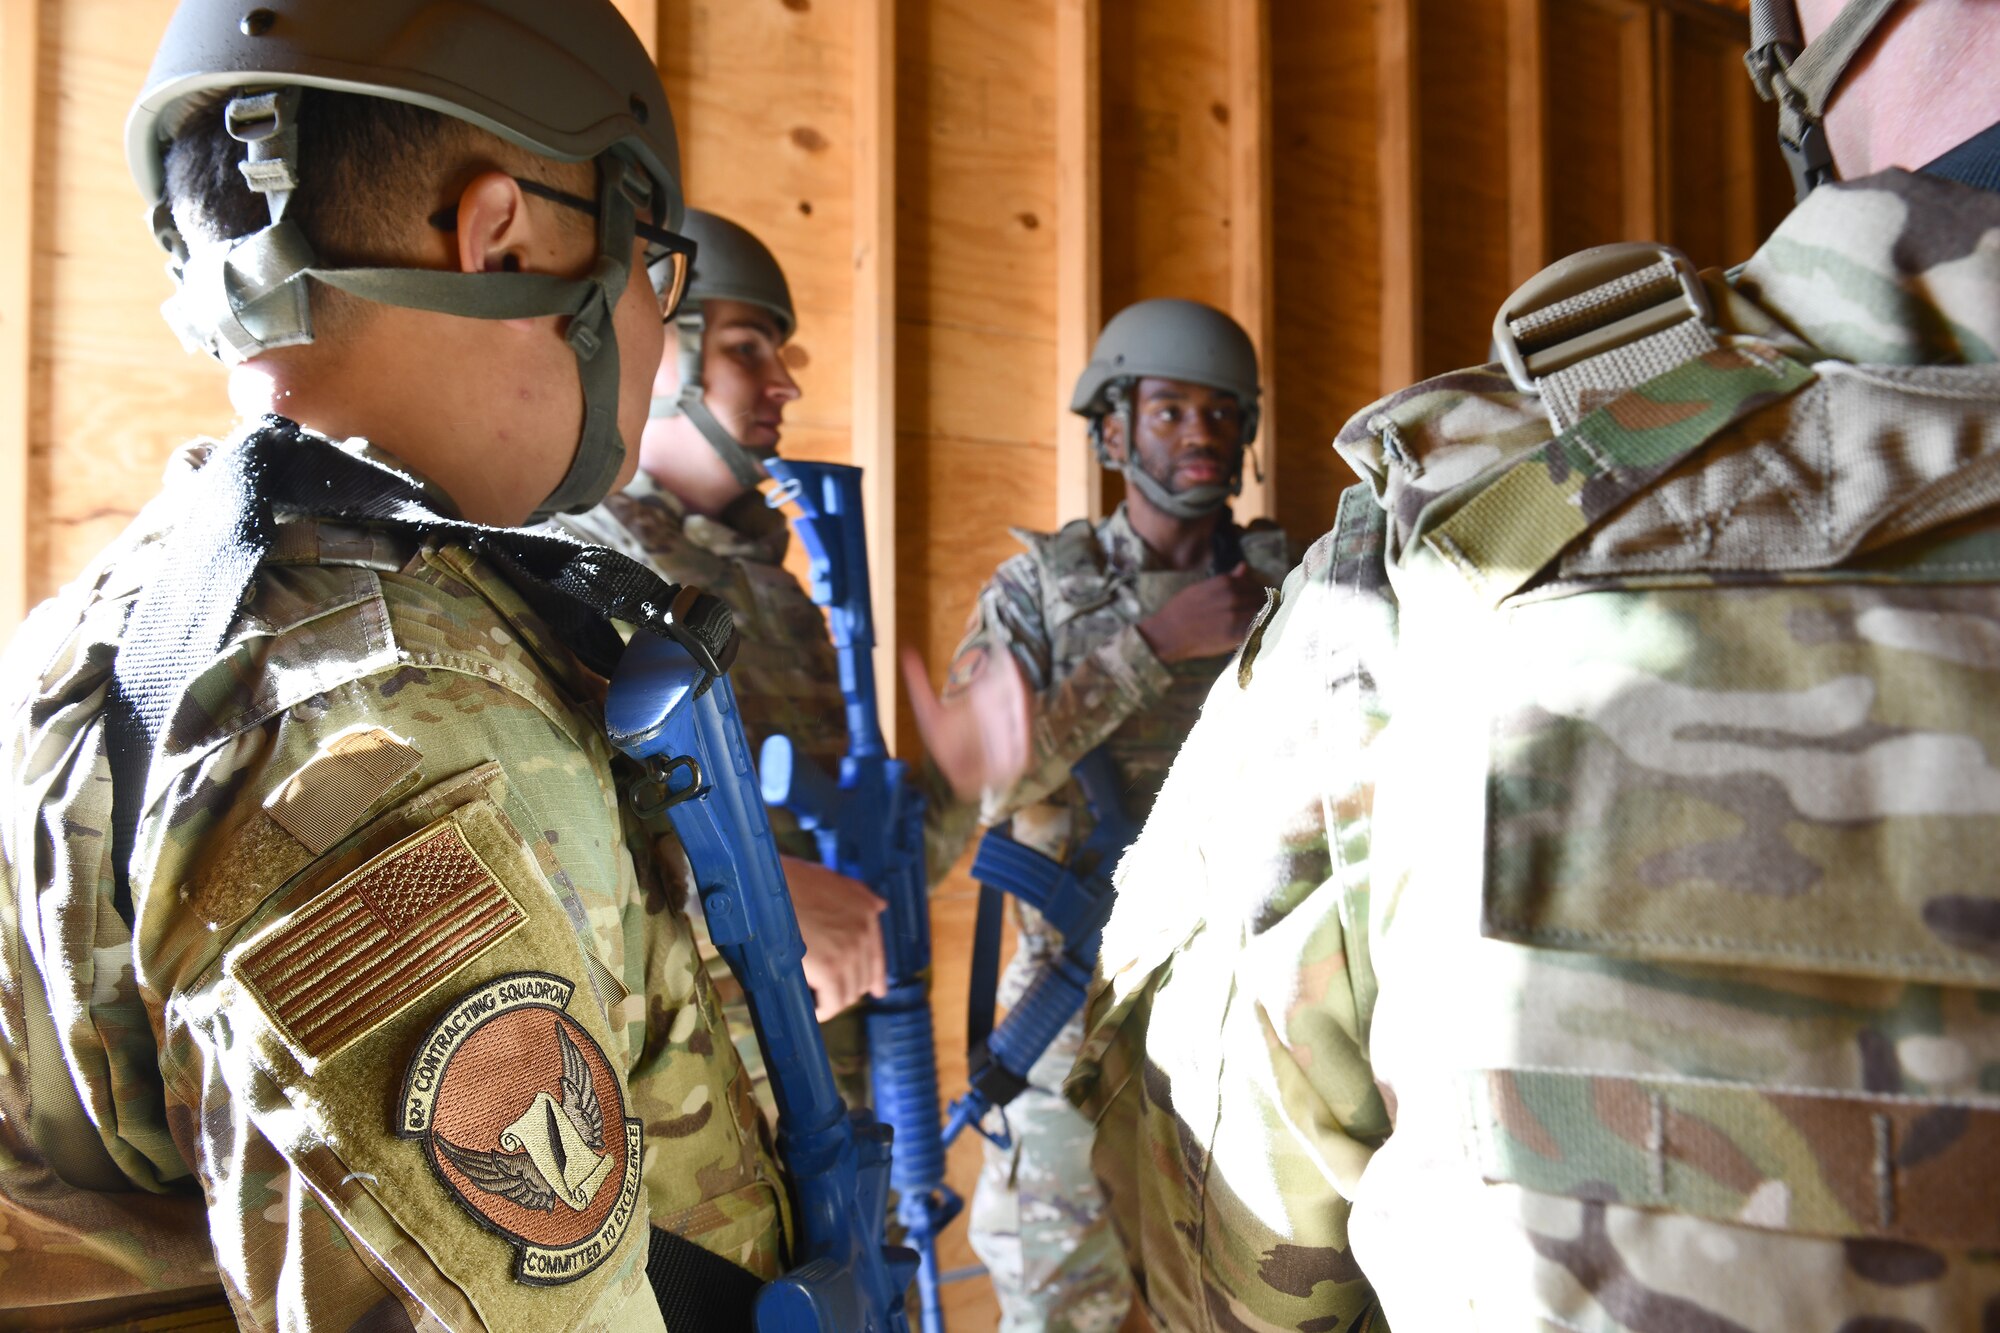 A group of contracting Airmen prepare to conduct simulated contract negotiations.